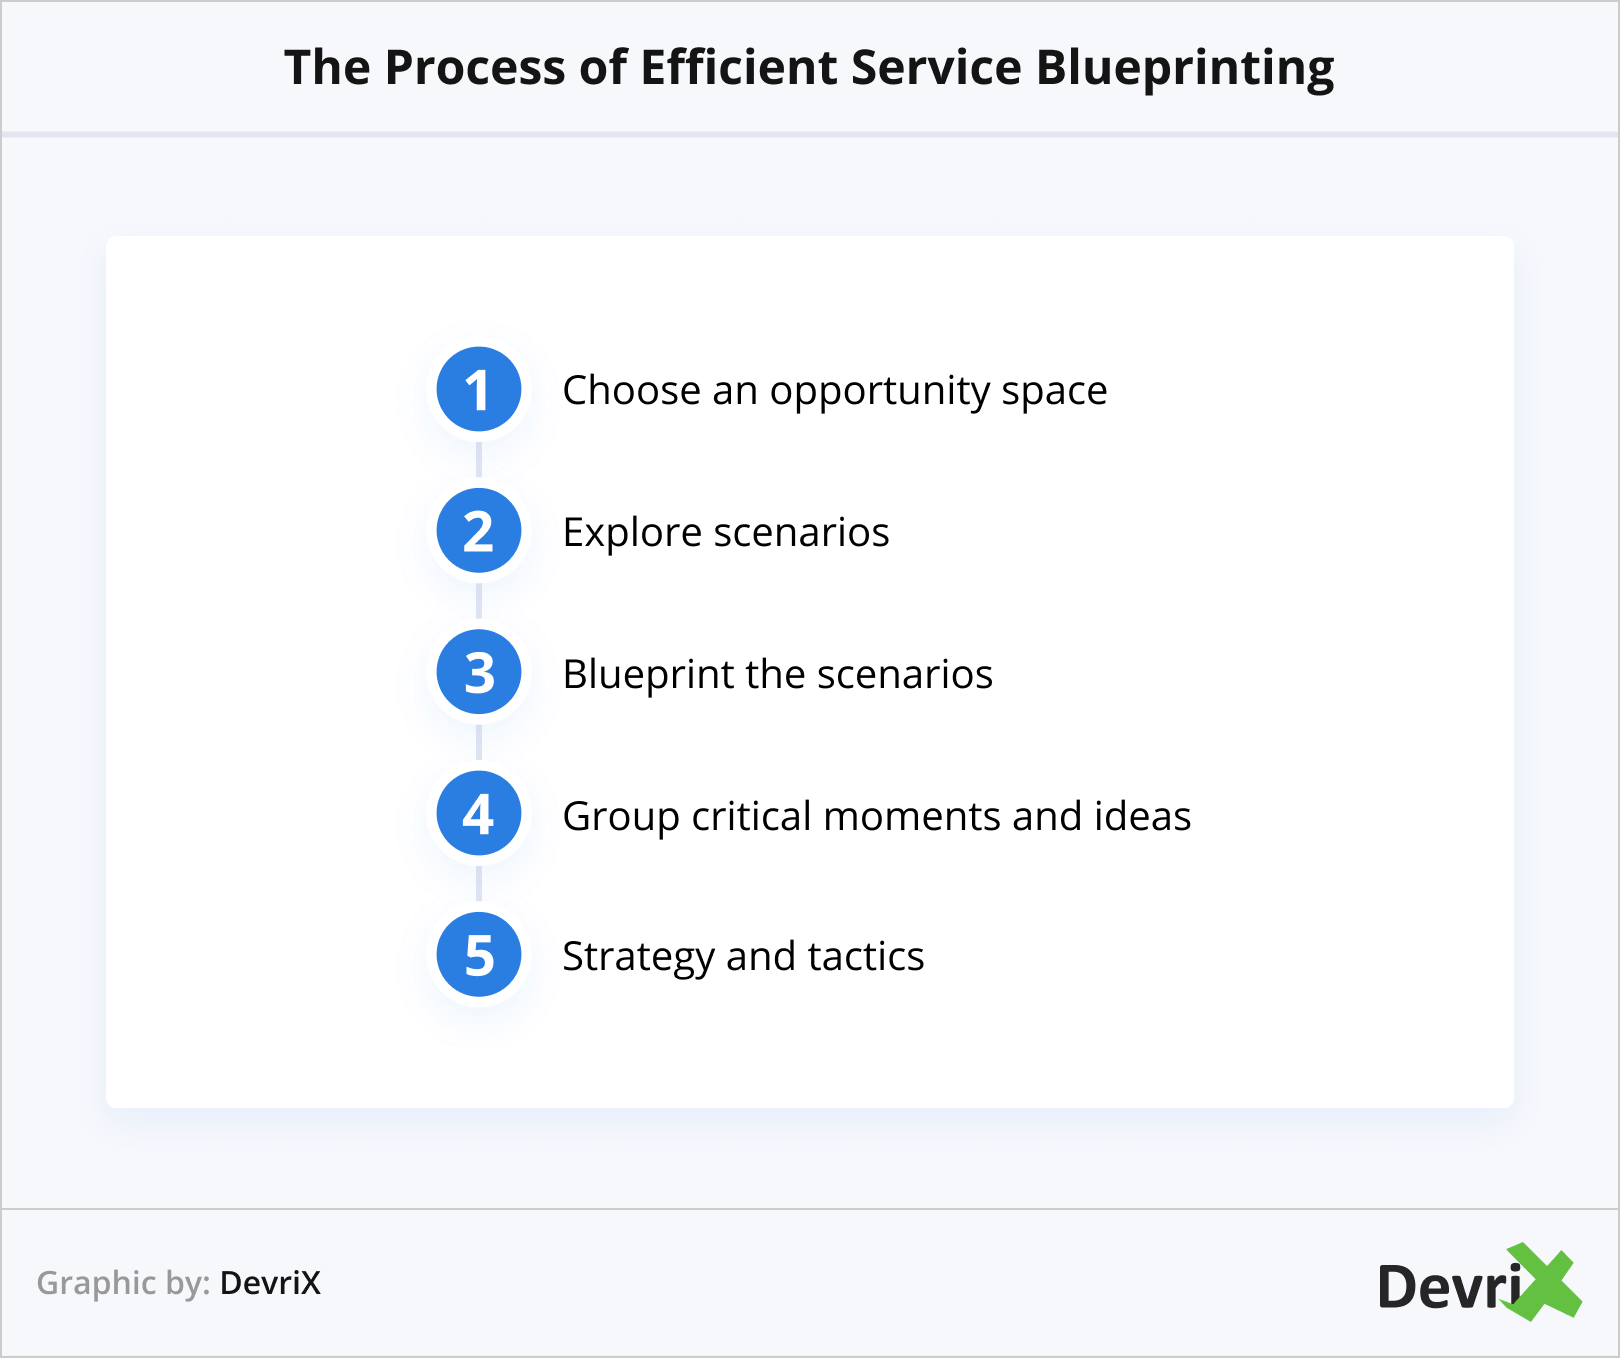 The Process of Efficient Service Blueprinting